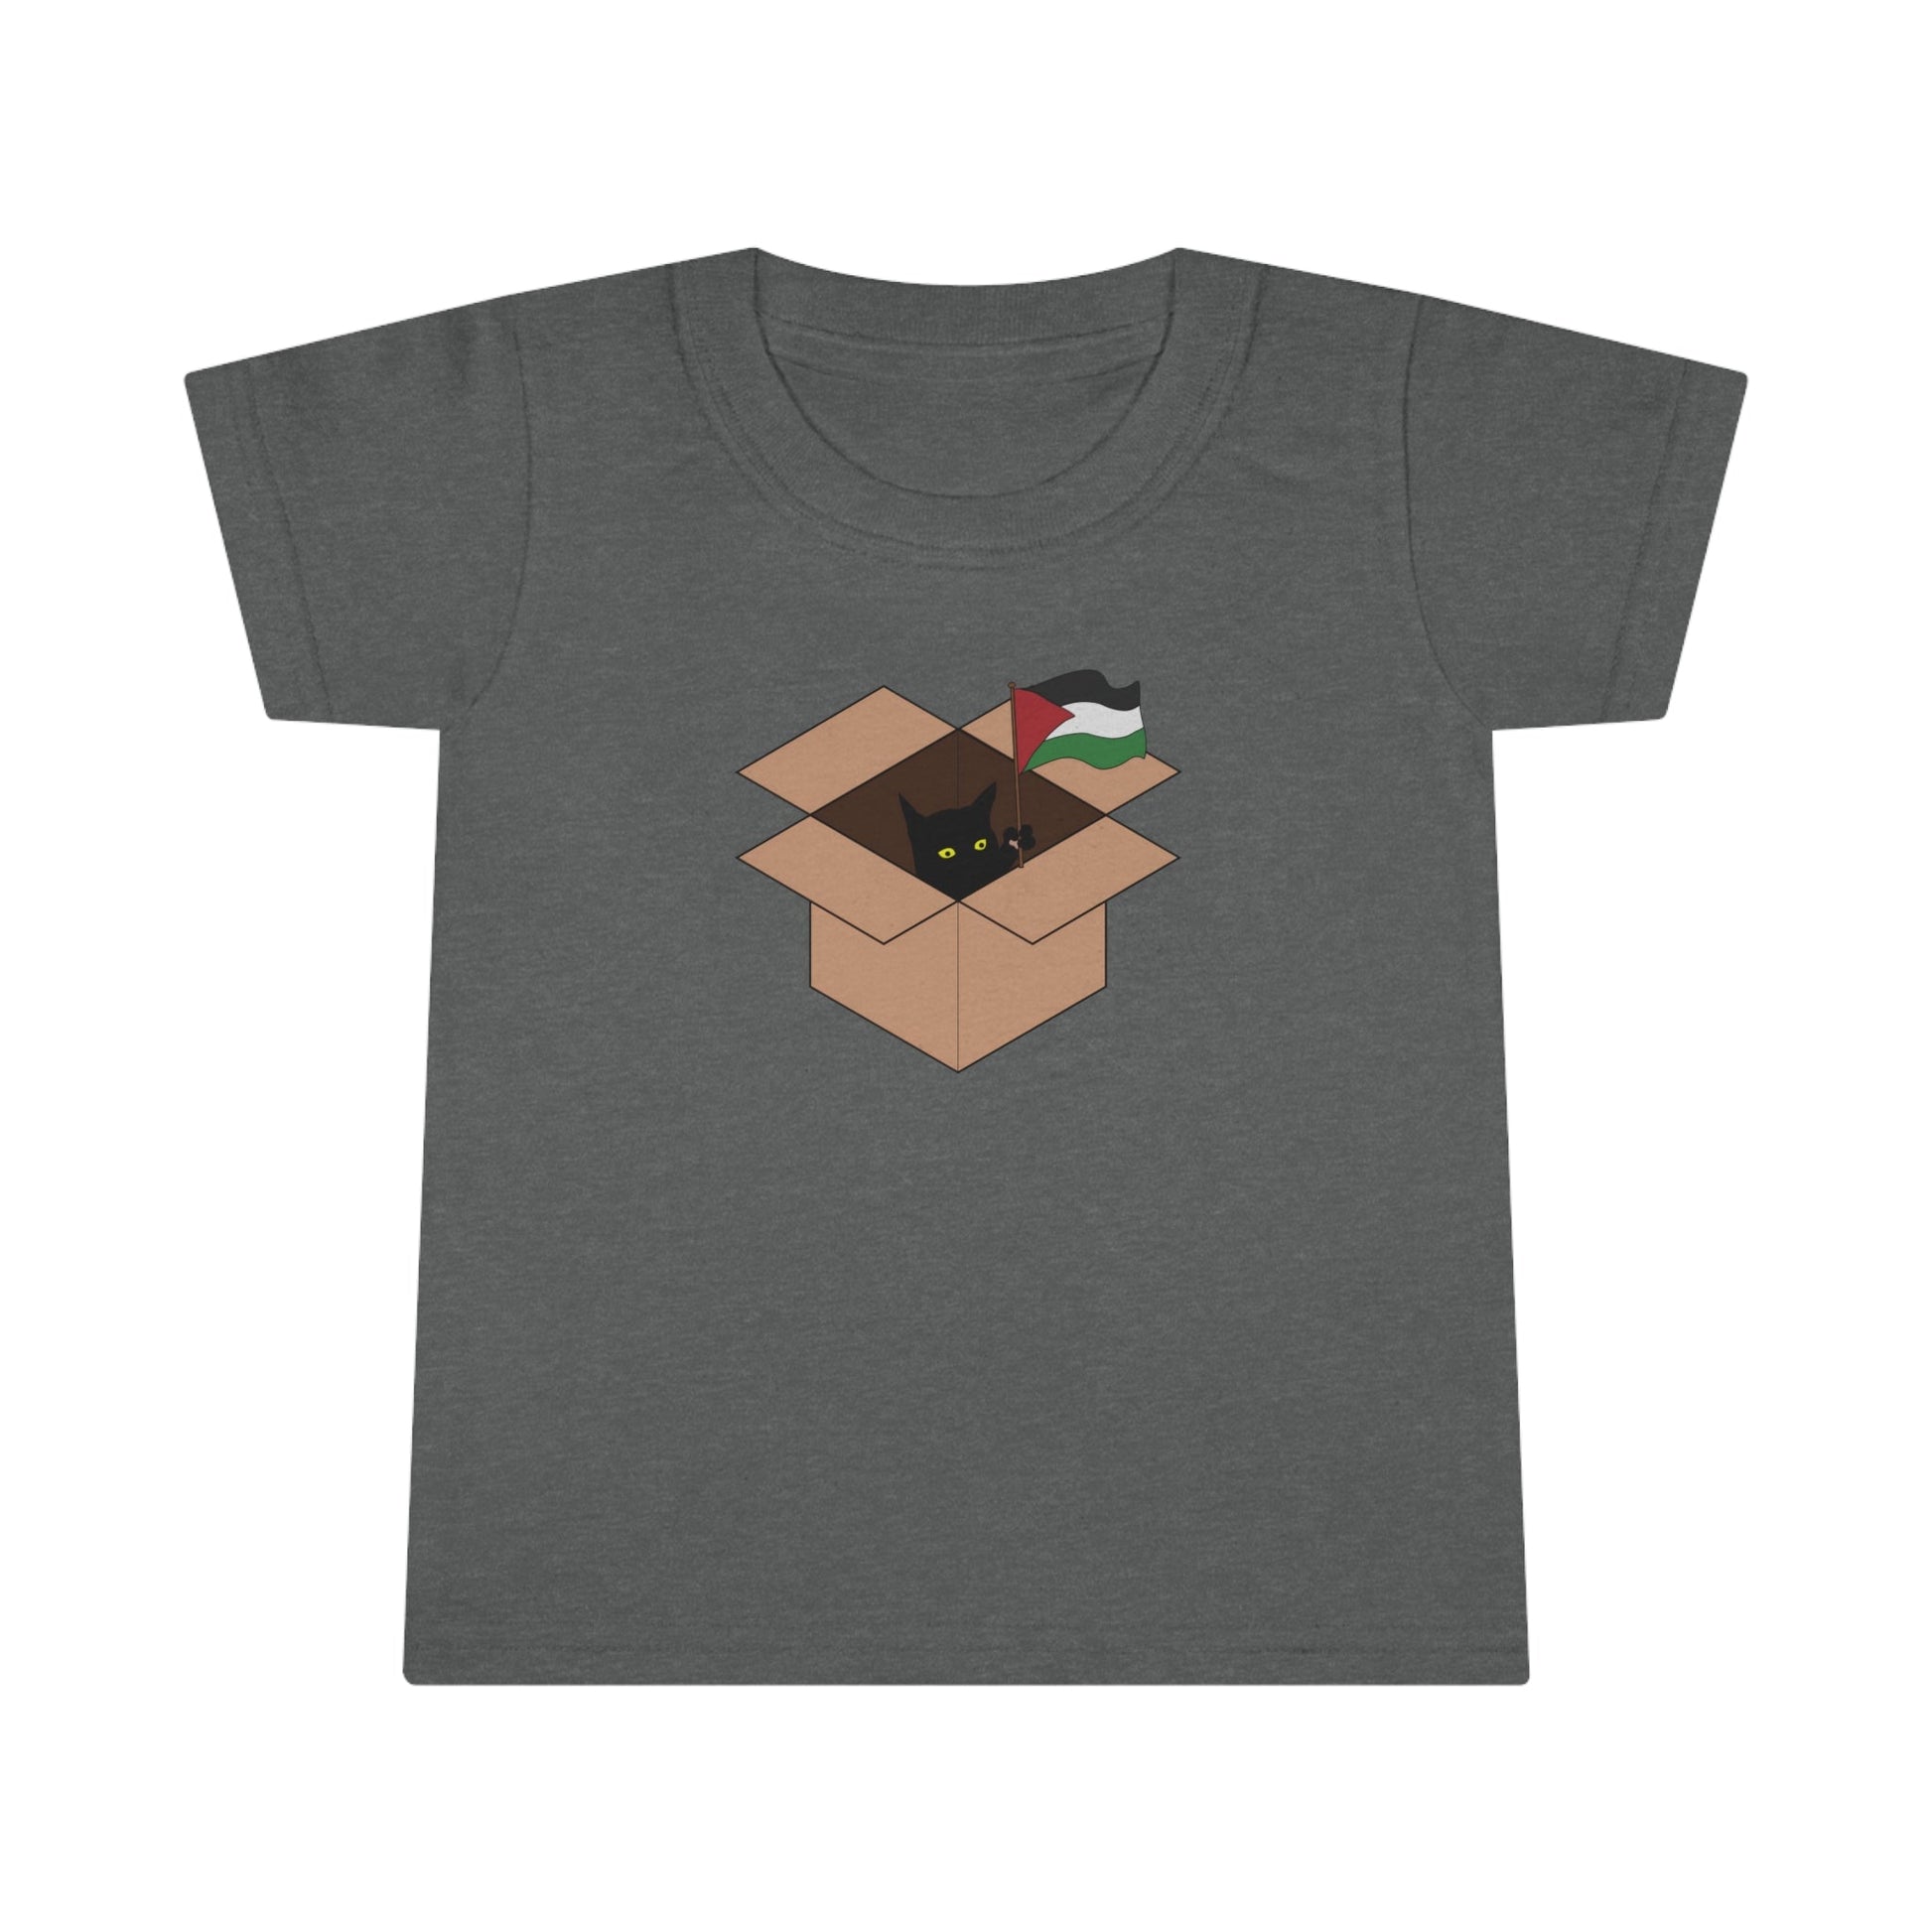 Toddler Cat Graphic T-Shirt